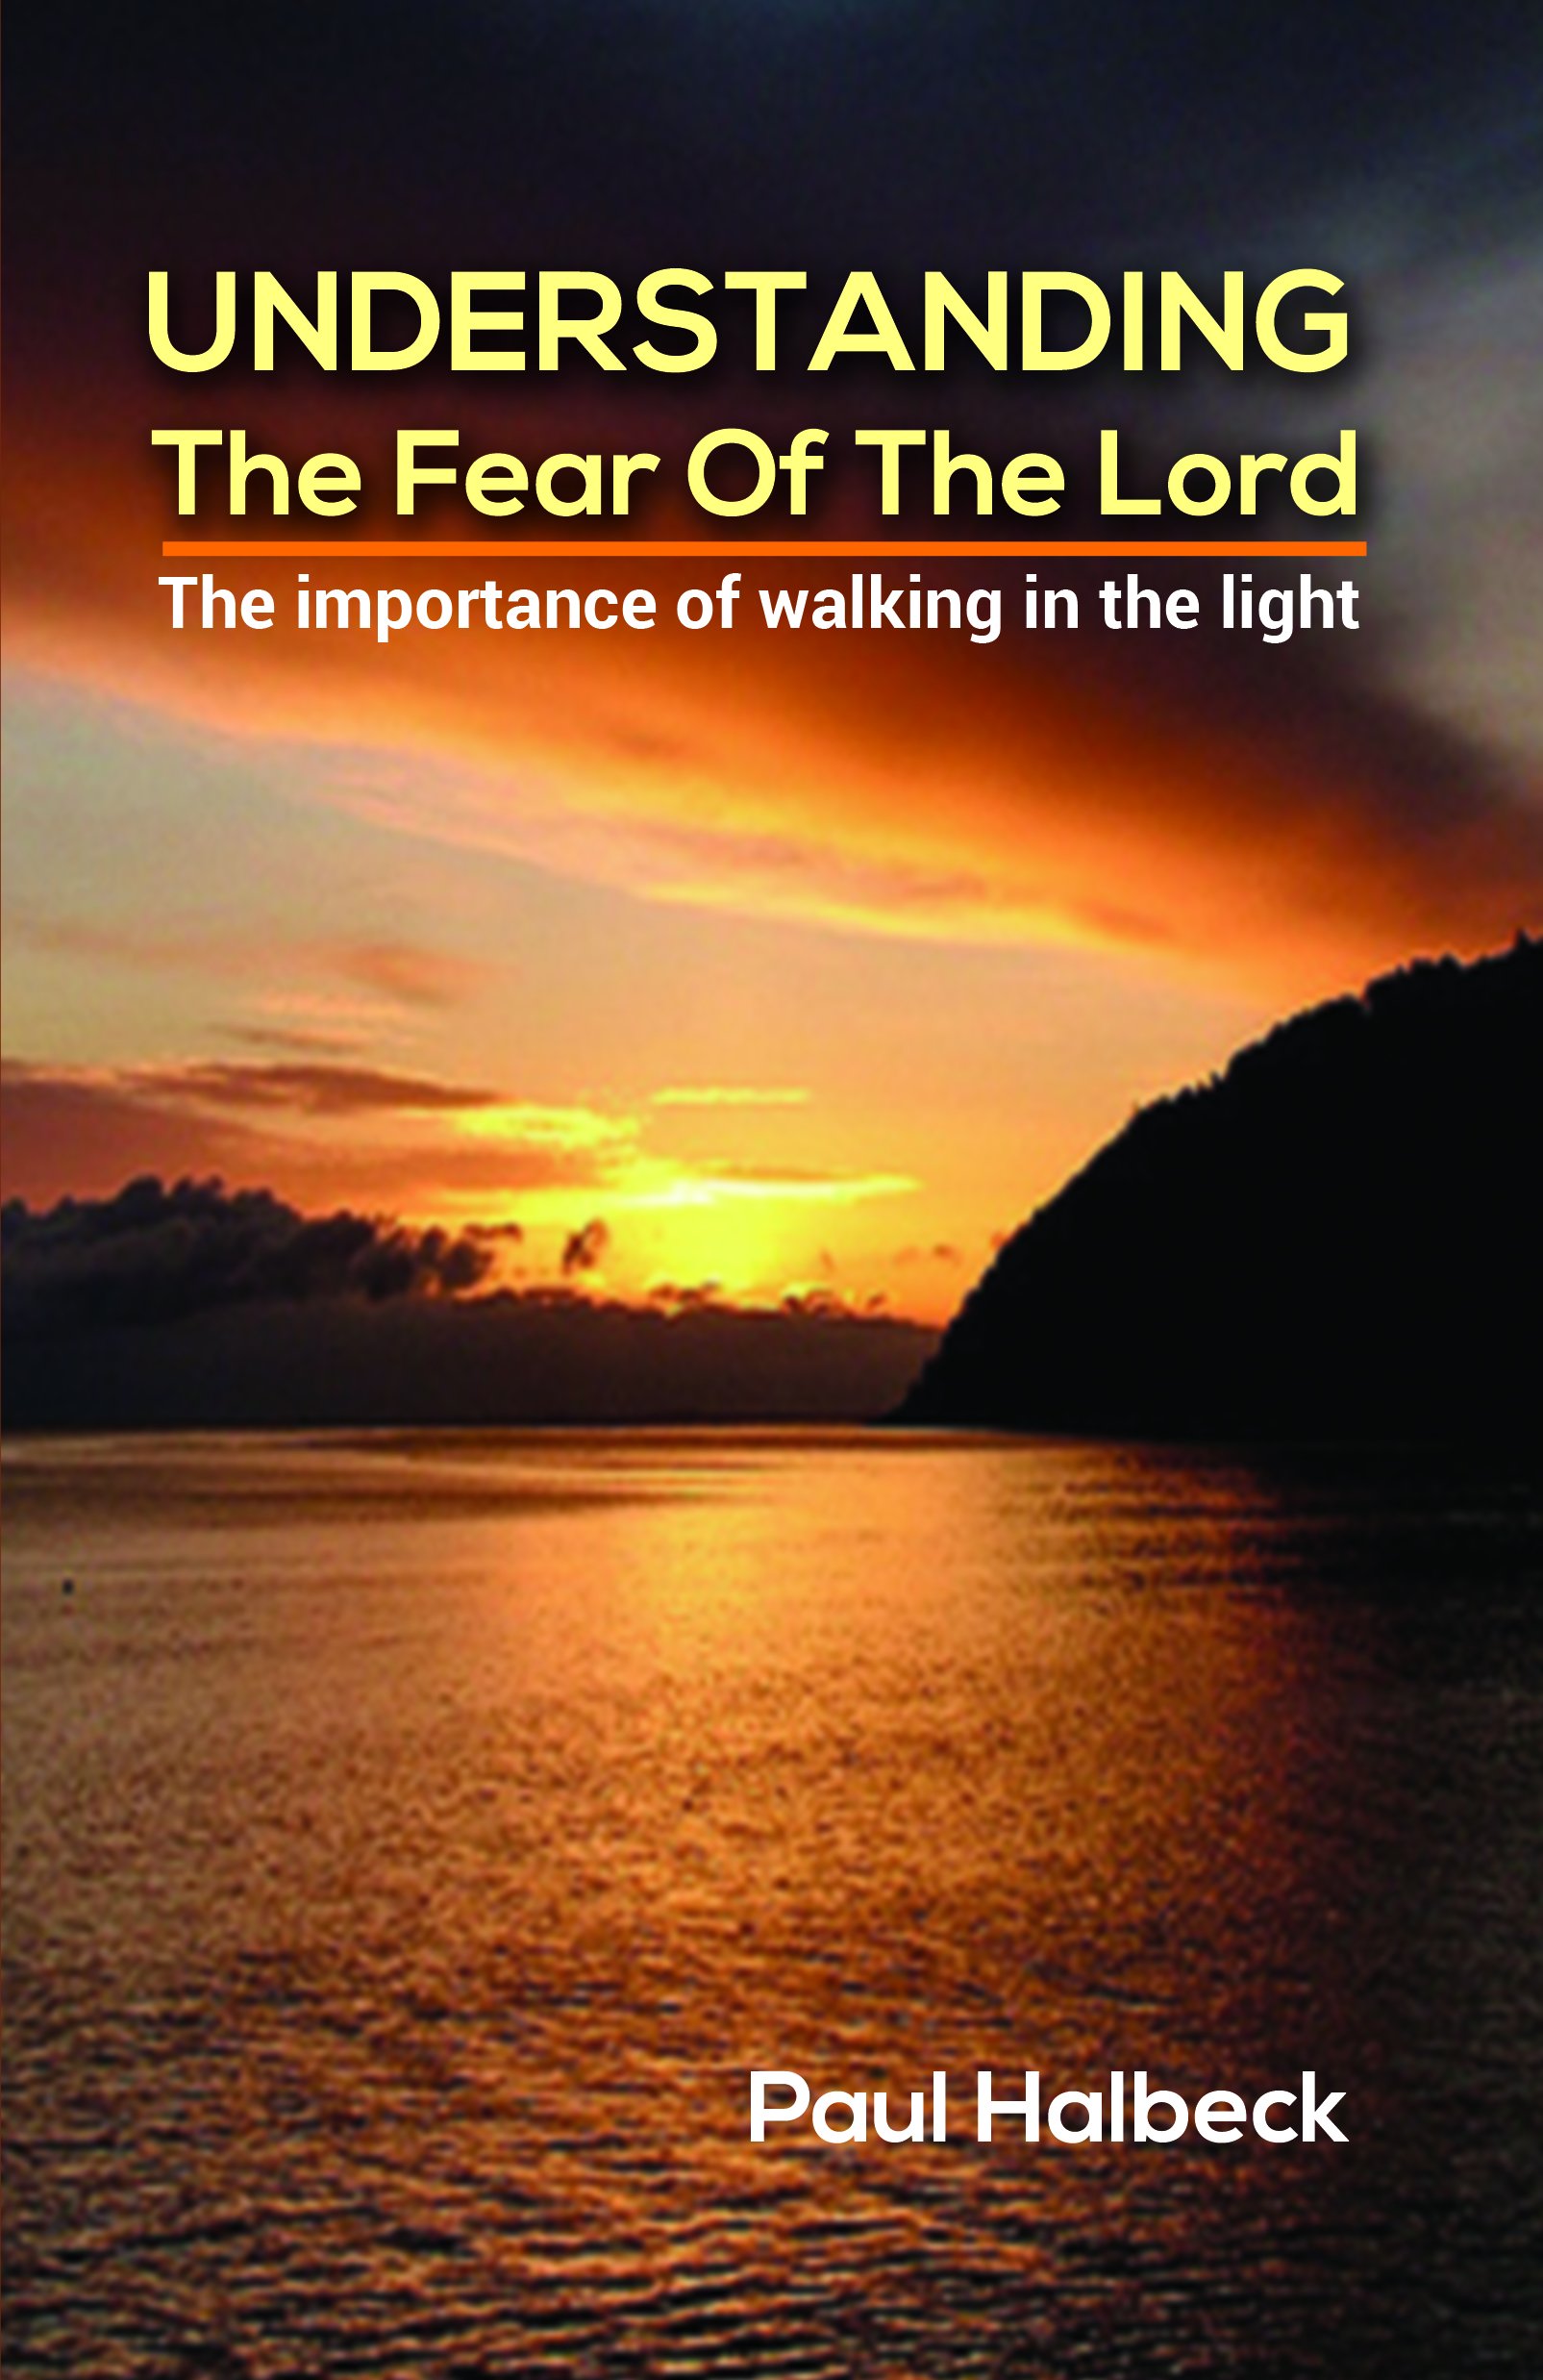 Understanding the fear of the Lord